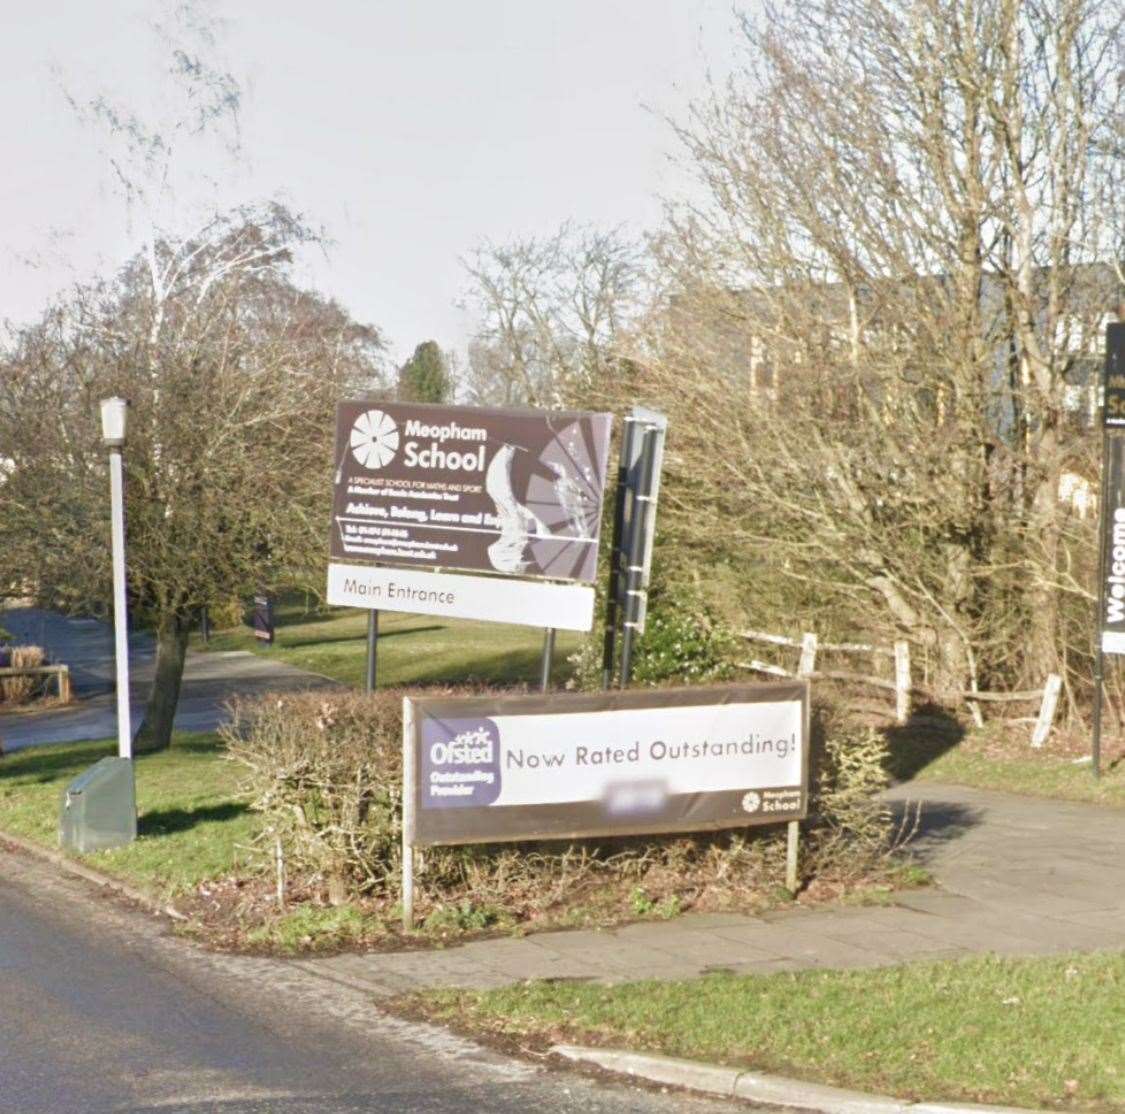 Meopham Secondary School in Wrotham Road, Meopham lost its outstanding status after its latest Ofsted inspection